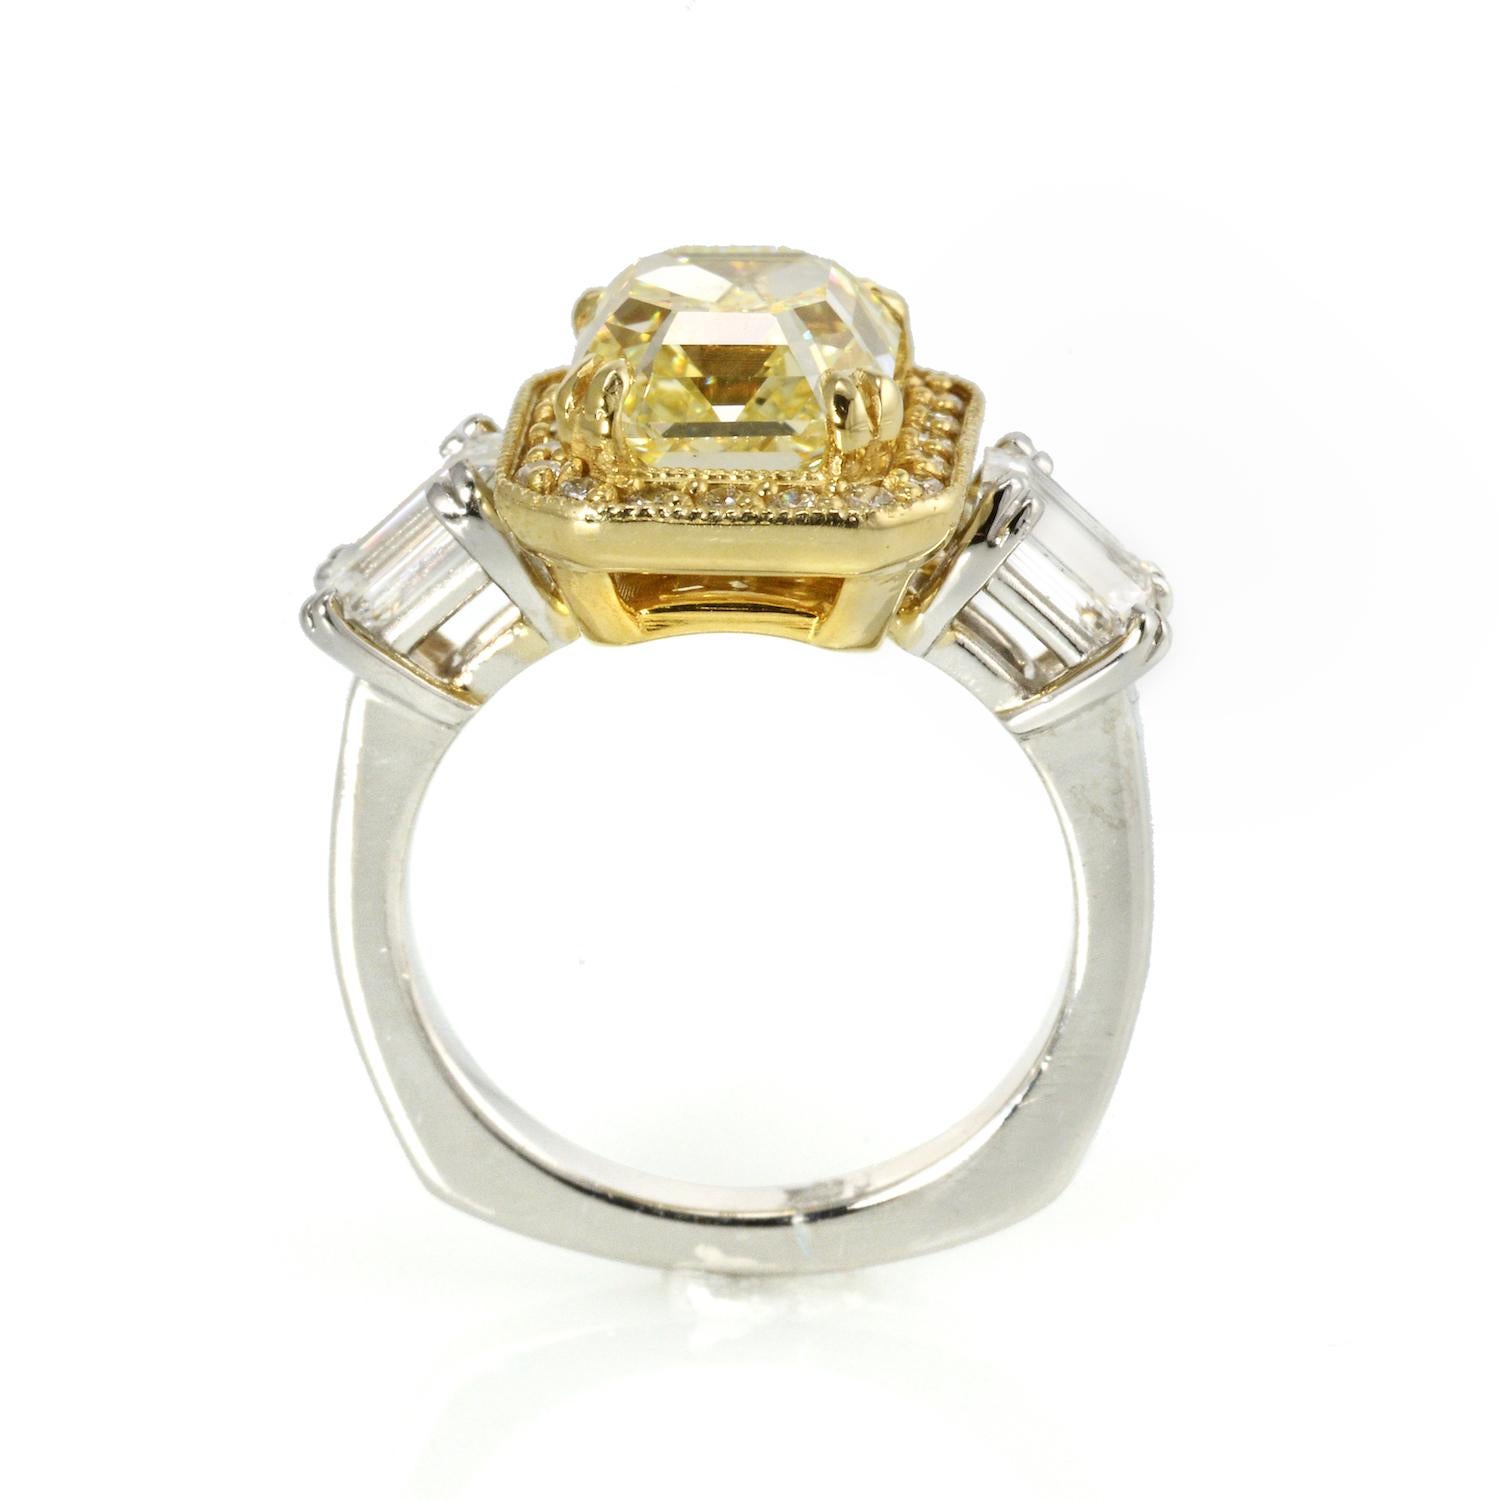 This Natural Fancy Yellow (VS1) is set in an interesting mounting. Purchased from an estate it is set with side Emerald Cut diamonds and a Halo of small colorless round diamond surrounding the center Fancy Yellow. 

Center Diamond: 3.00 Carat Fancy